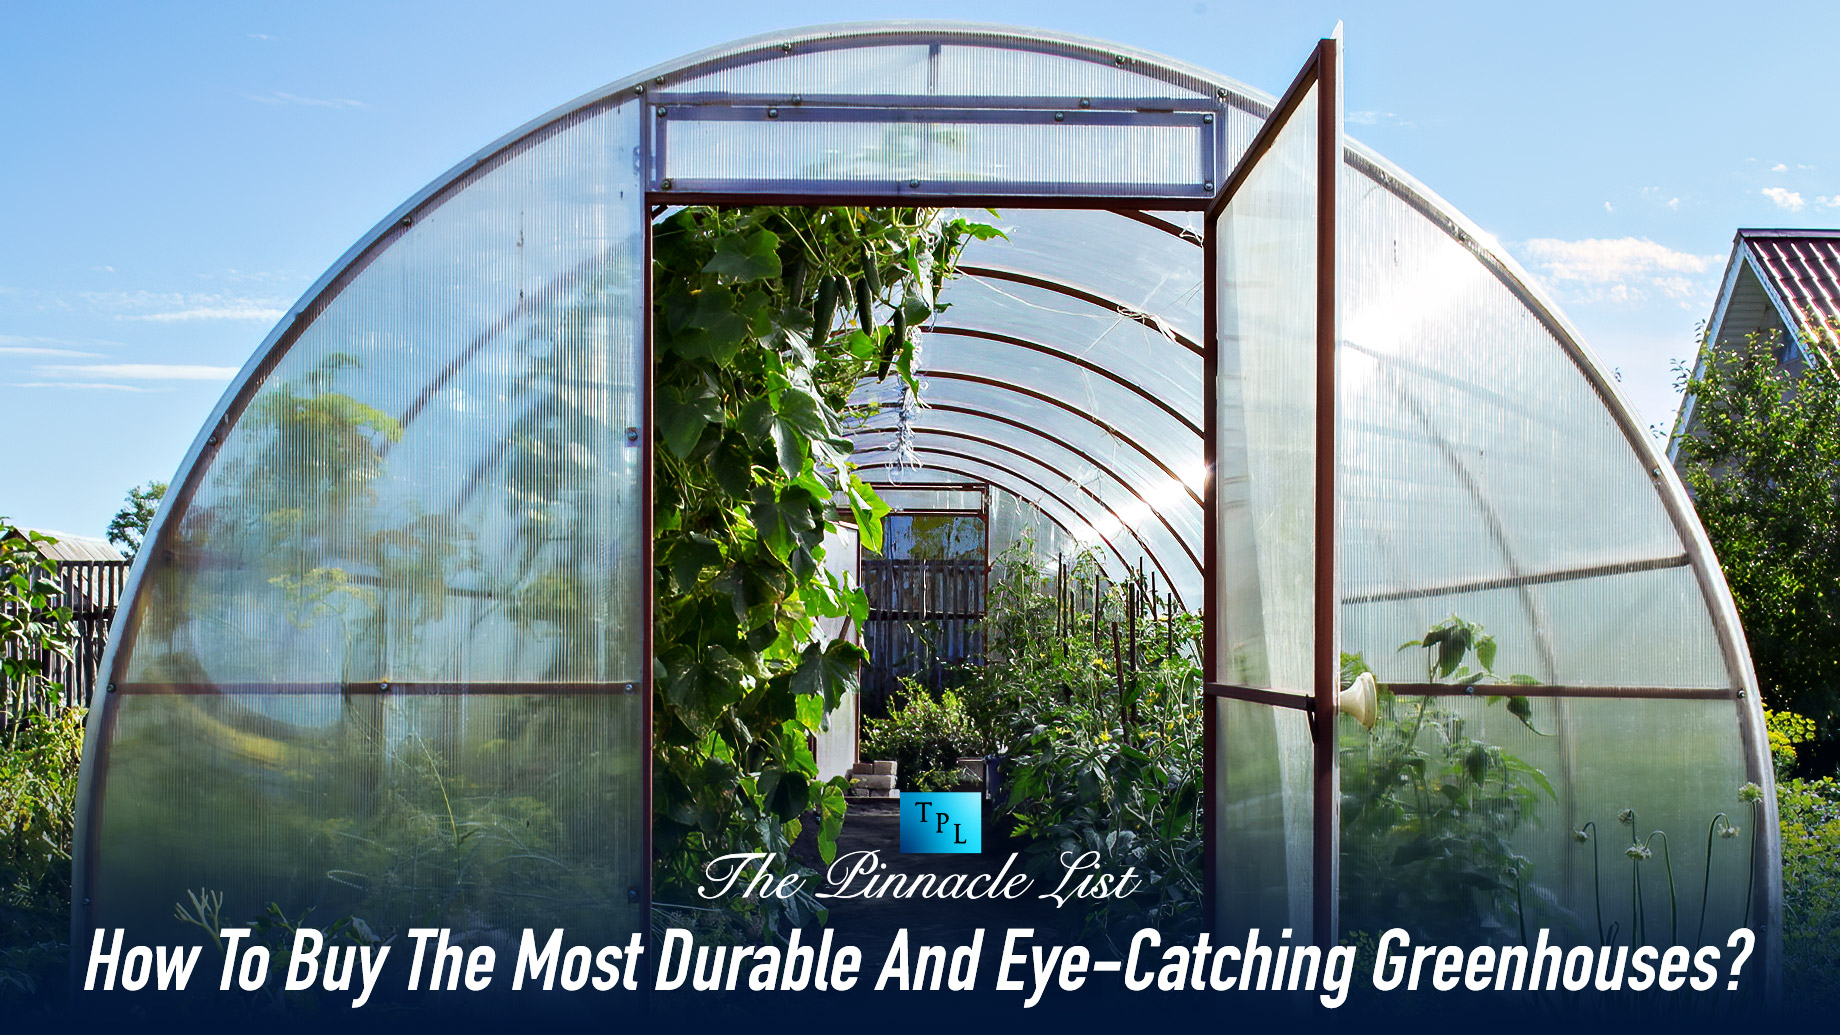 How To Buy The Most Durable And Eye-Catching Greenhouses?